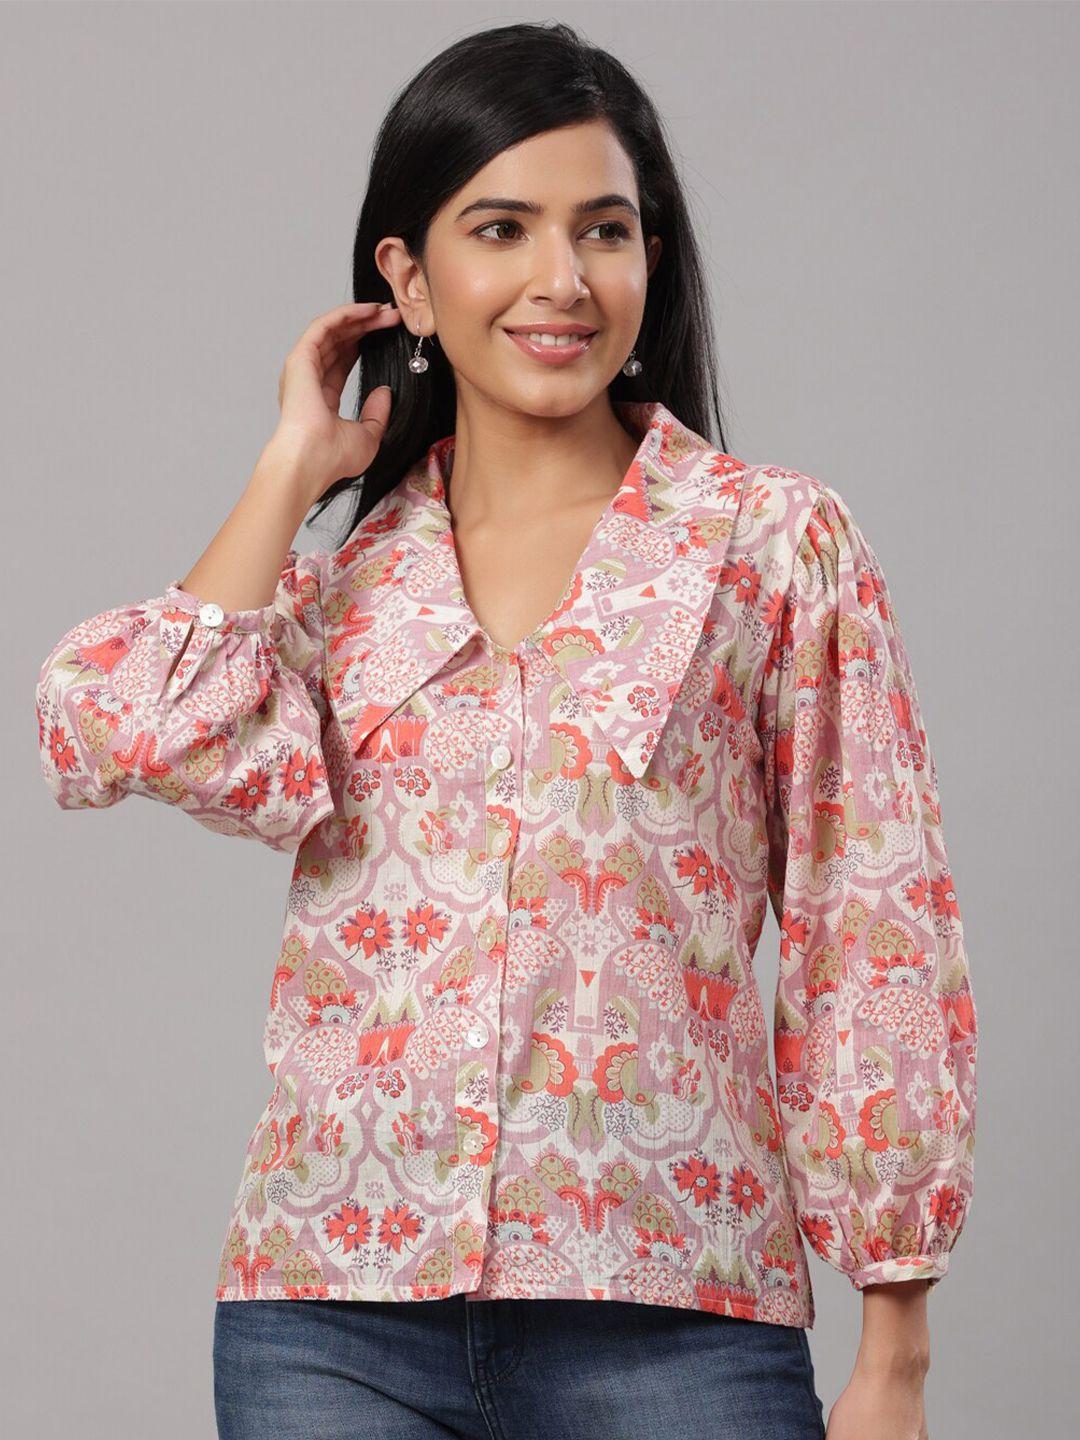 do dhaage purple & coral floral print shirt style top